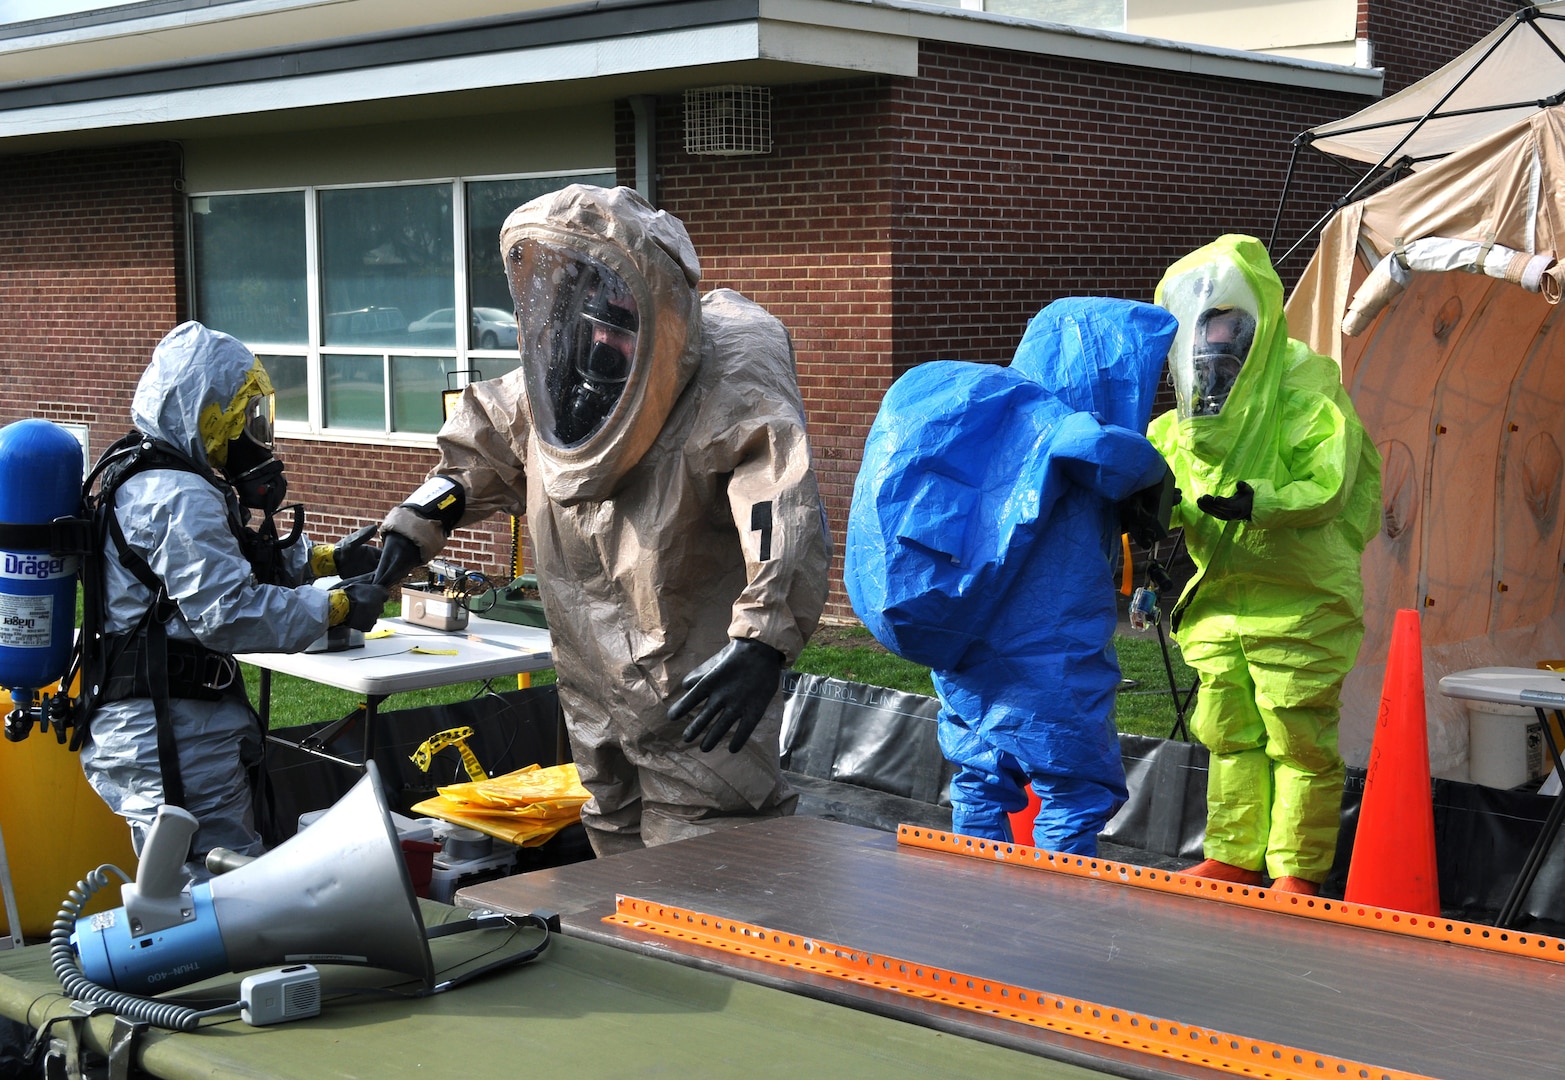 Team members of the 102nd Civil Support Team, Oregon National Guard, conduct a decontamination training and evaluation exercise at the old Silverton High School in Silverton, Oregon, in 2011. Sgt. 1st Class Rowena Simshaw and Staff Sgt. April Henrickx of the Decon Team, 102nd Civil Support Team,  aid in decontaminating other team members.